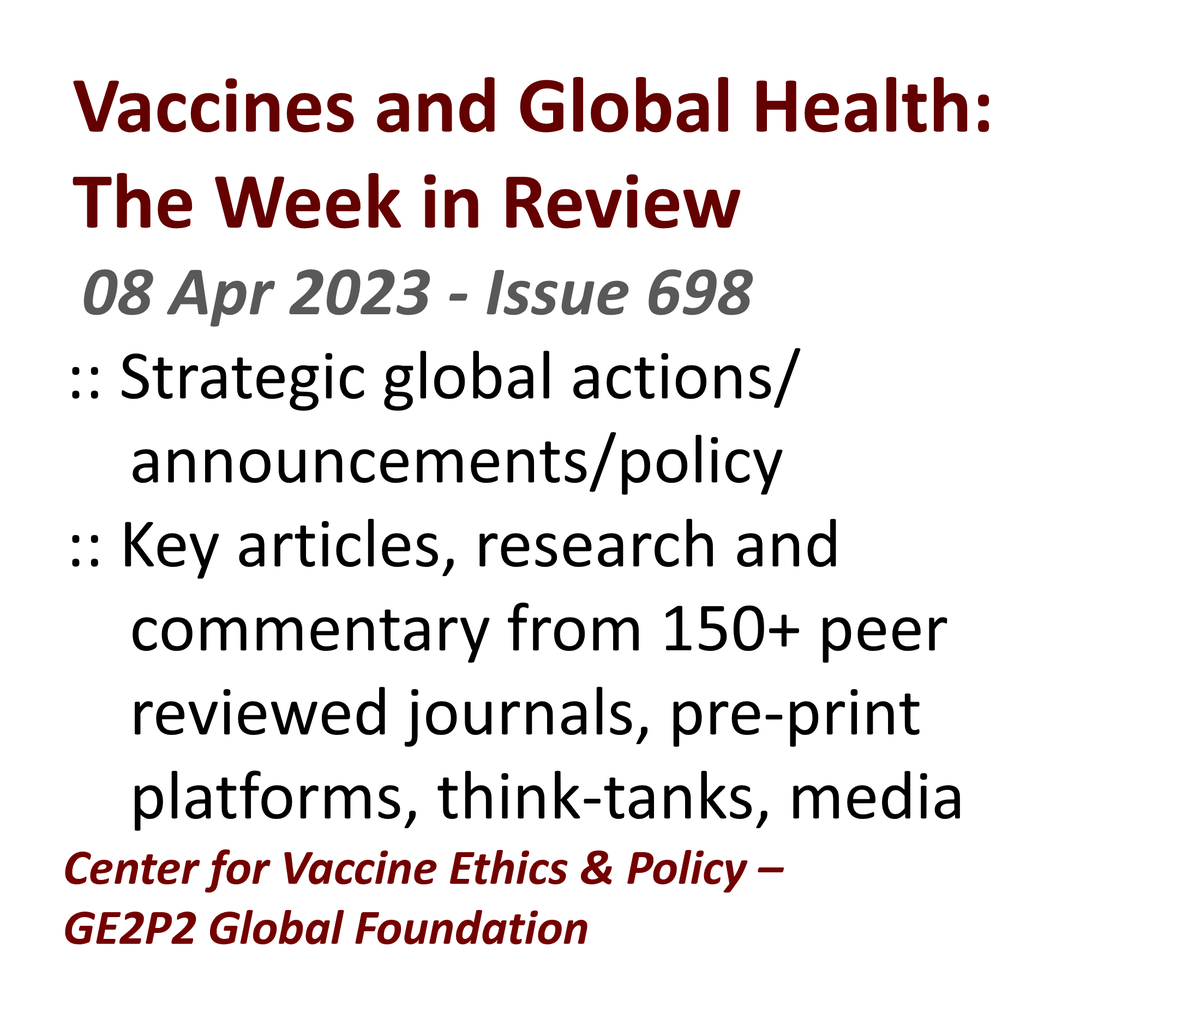 Vaccines and Global Health: The Week in Review
08 Apr 2023 :: Strategic announcements; articles from 150+ academic journals; preprints, grey lit; media centerforvaccineethicsandpolicy.net
#vaccines #immunization #globalhealth #humanrights #humanitarian #ethics #equity #zerodosechildren